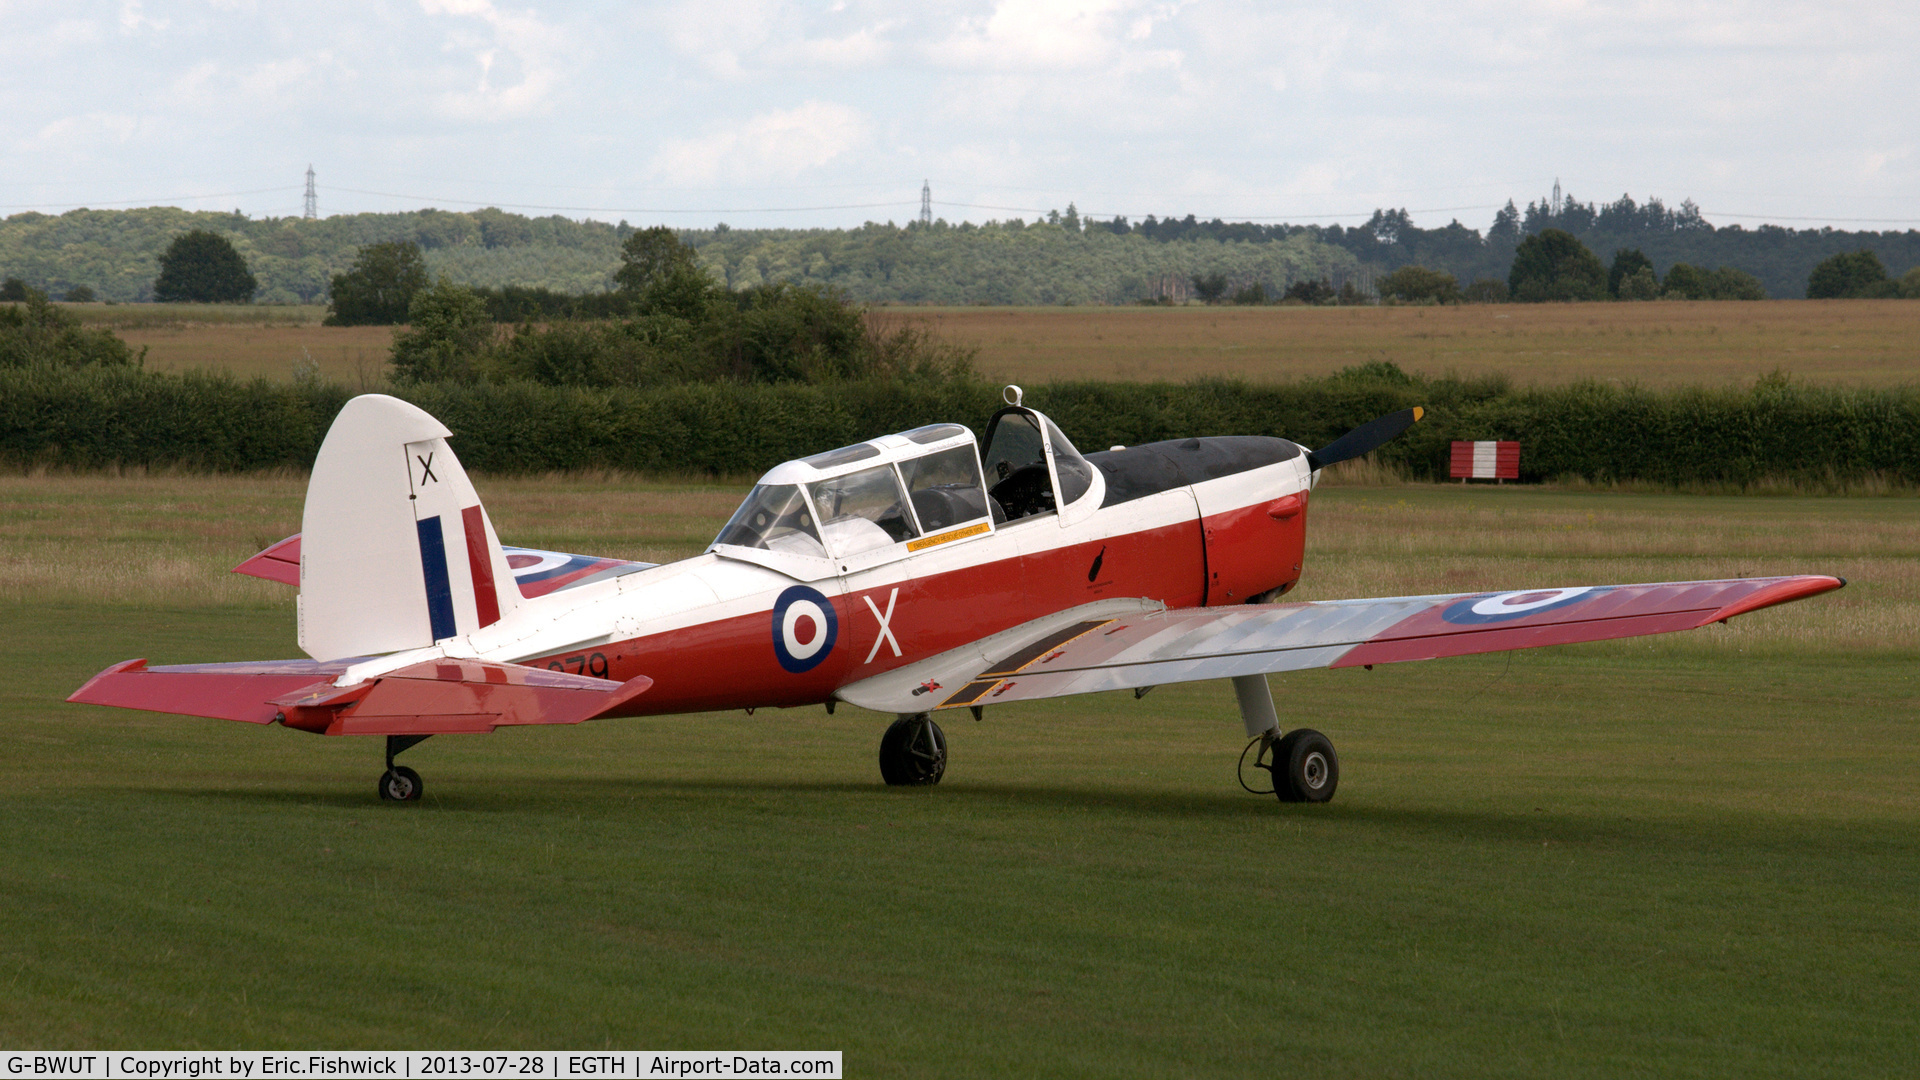 G-BWUT, 1953 De Havilland DHC-1 Chipmunk T.10 C/N C1/0918, 2. WZ879 at The Shuttleworth Collection Wings & Wheels Flying Day, July 2013.